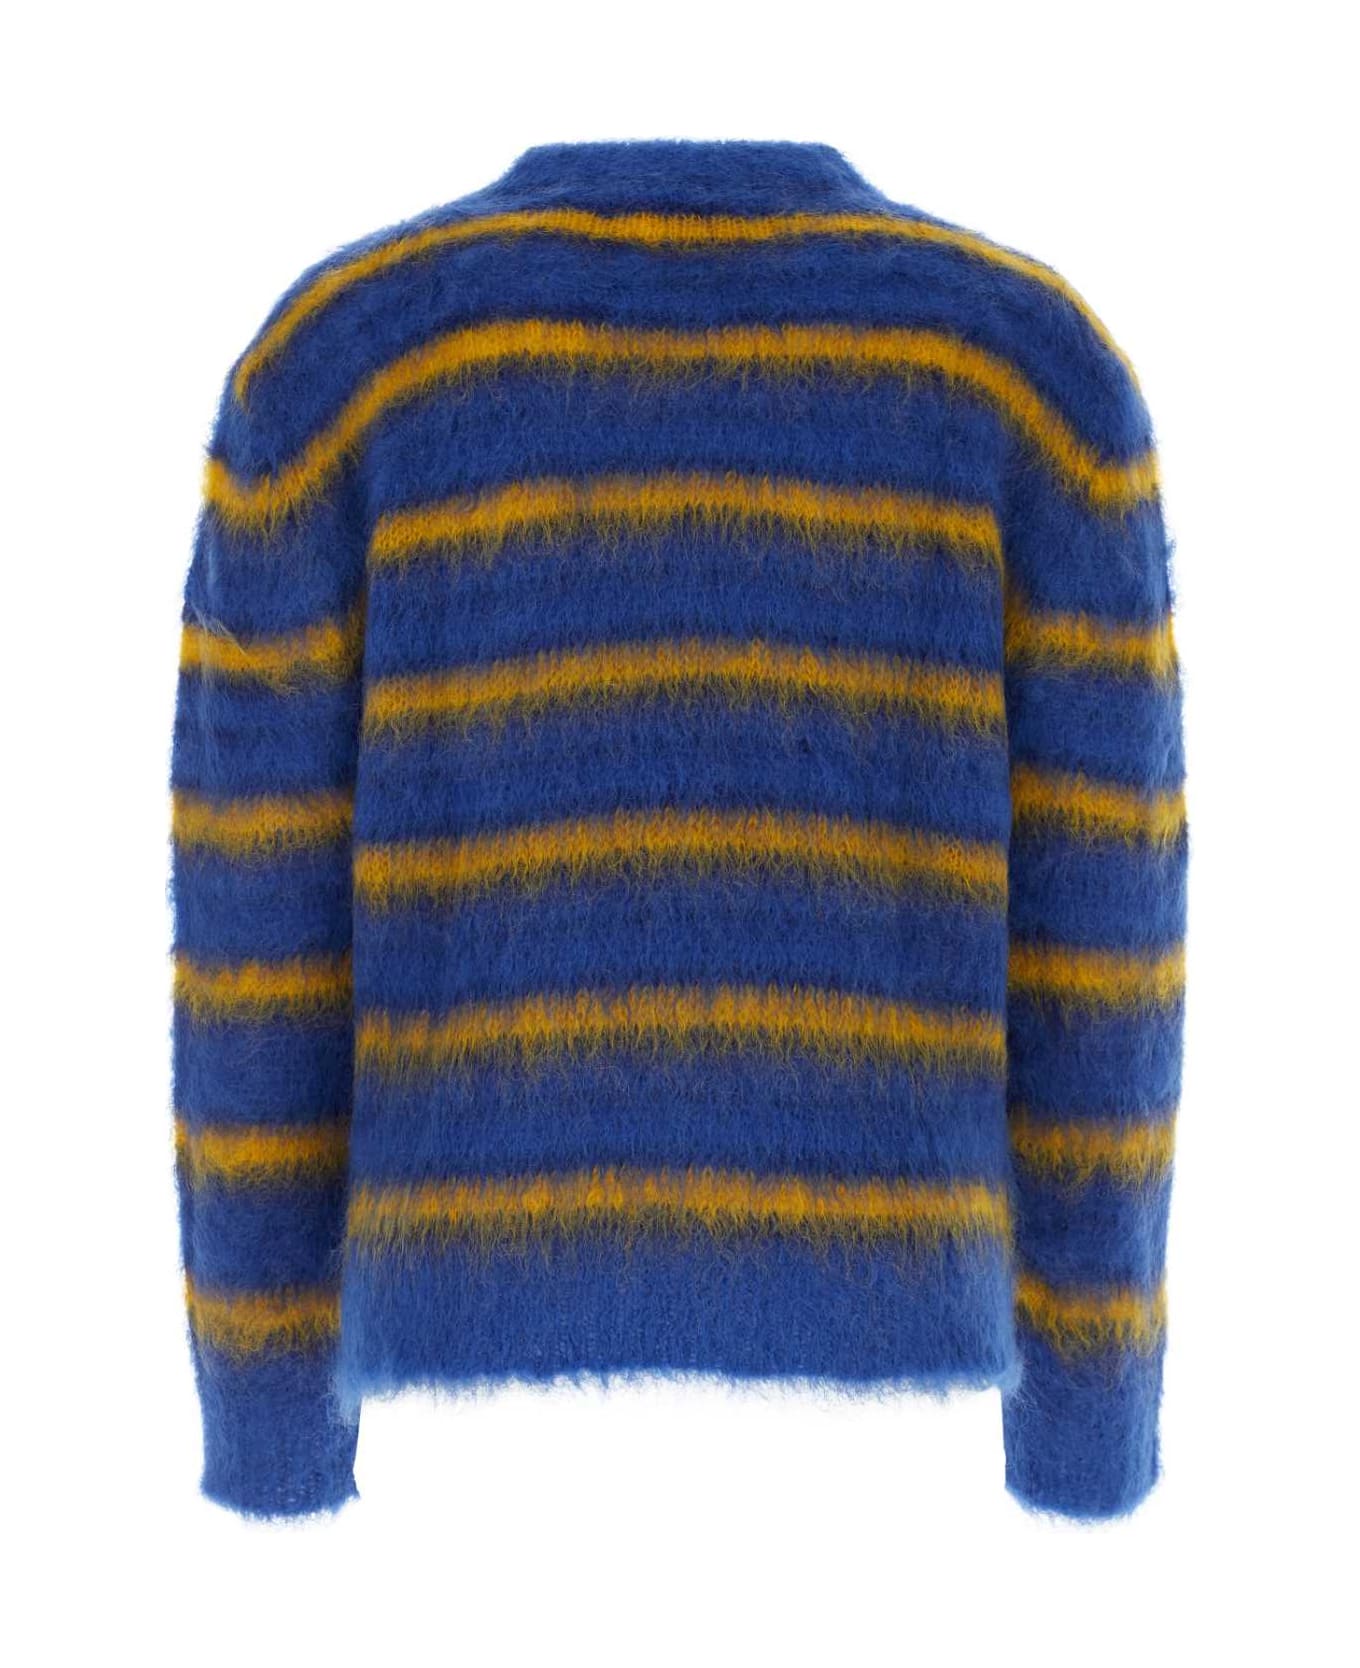 Marni Embroidered Mohair Blend Sweater - ROYAL